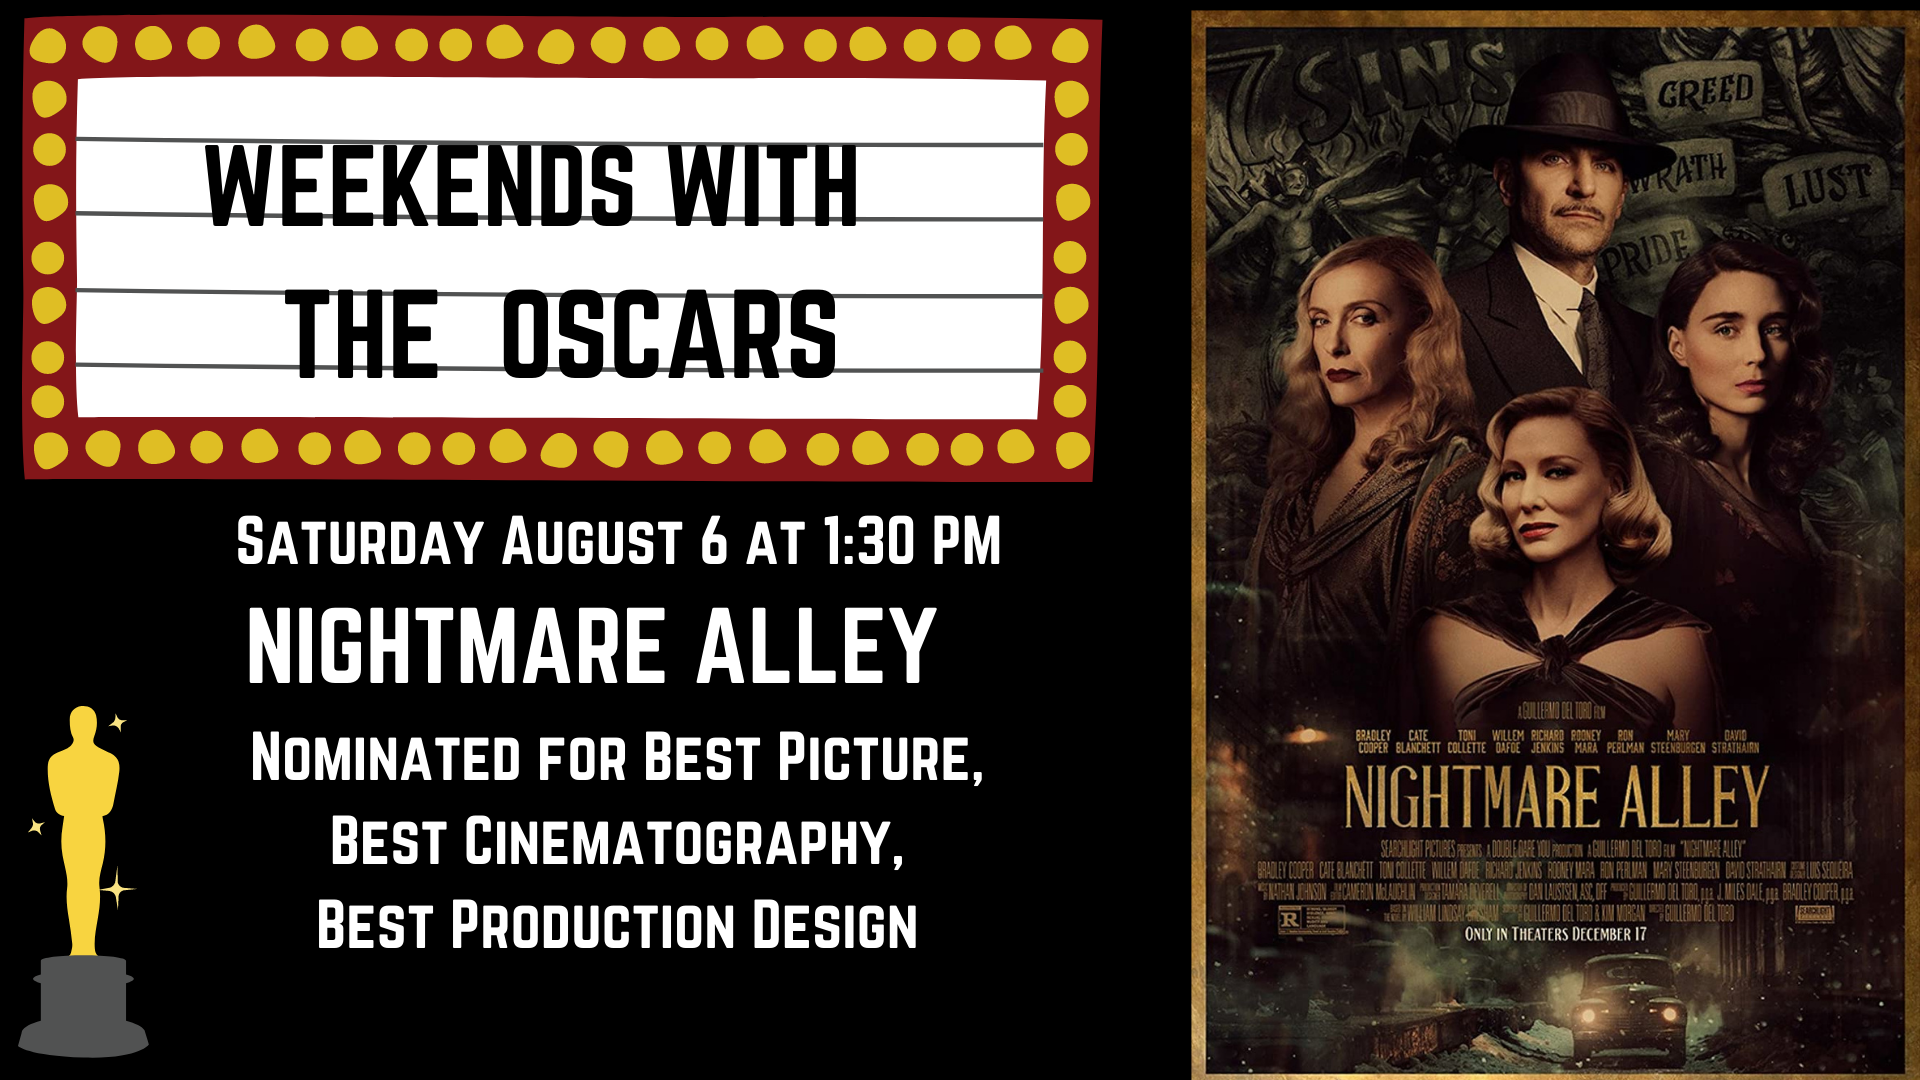 Banner advertising our screening of NIGHTMARE ALLEY on August 6 at 1:30 PM, featuring the movie poster.